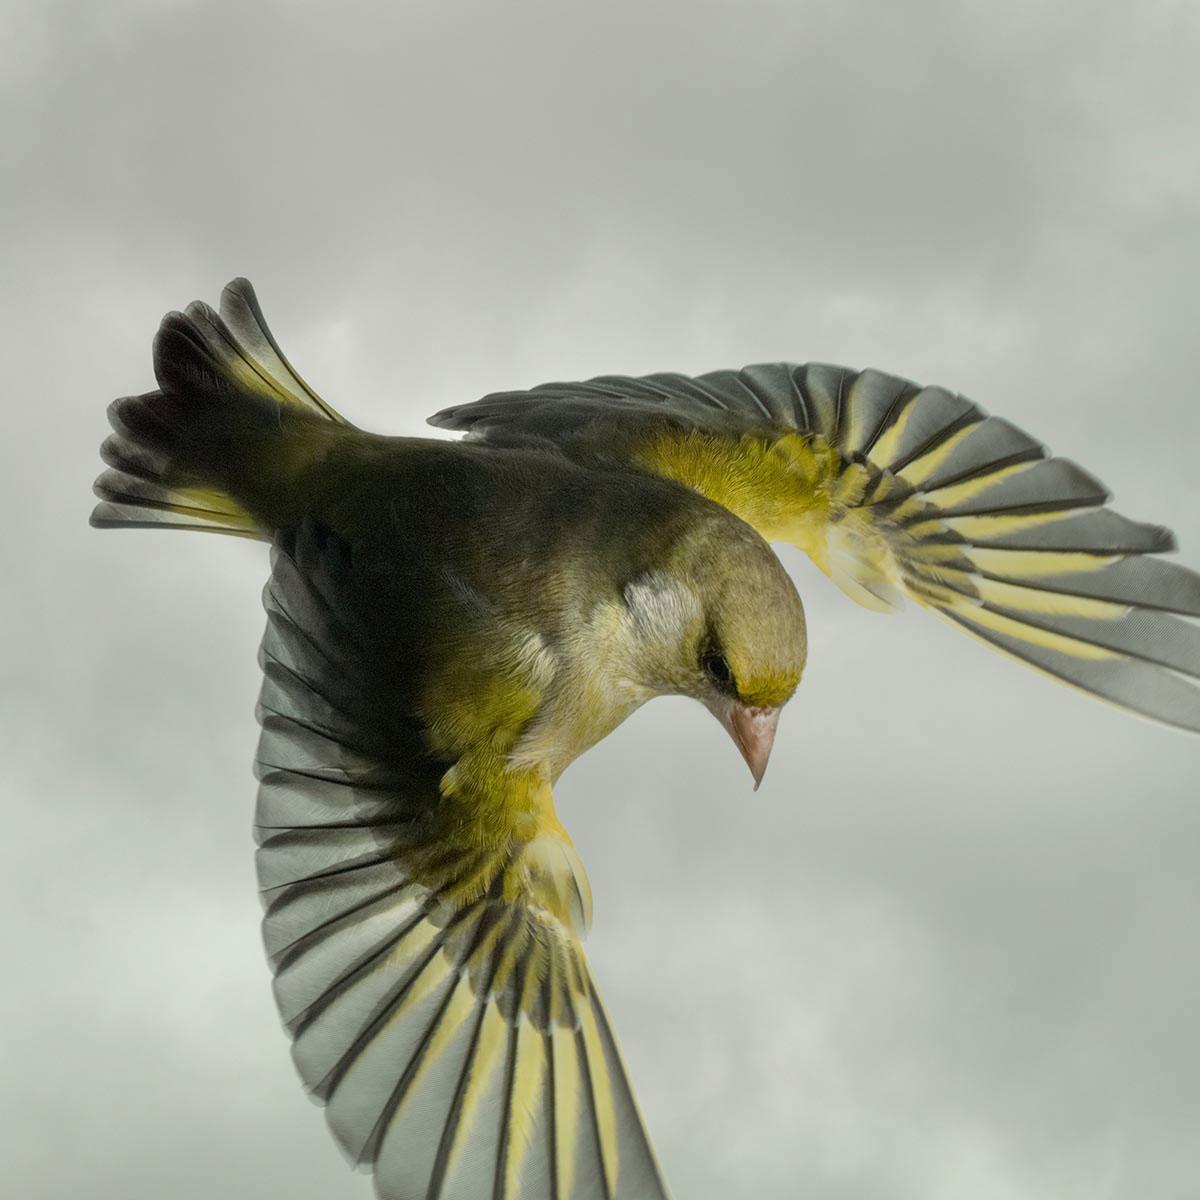 Greenfinch by Mark Harvey 30" x 30" C-type Photographic Print Only